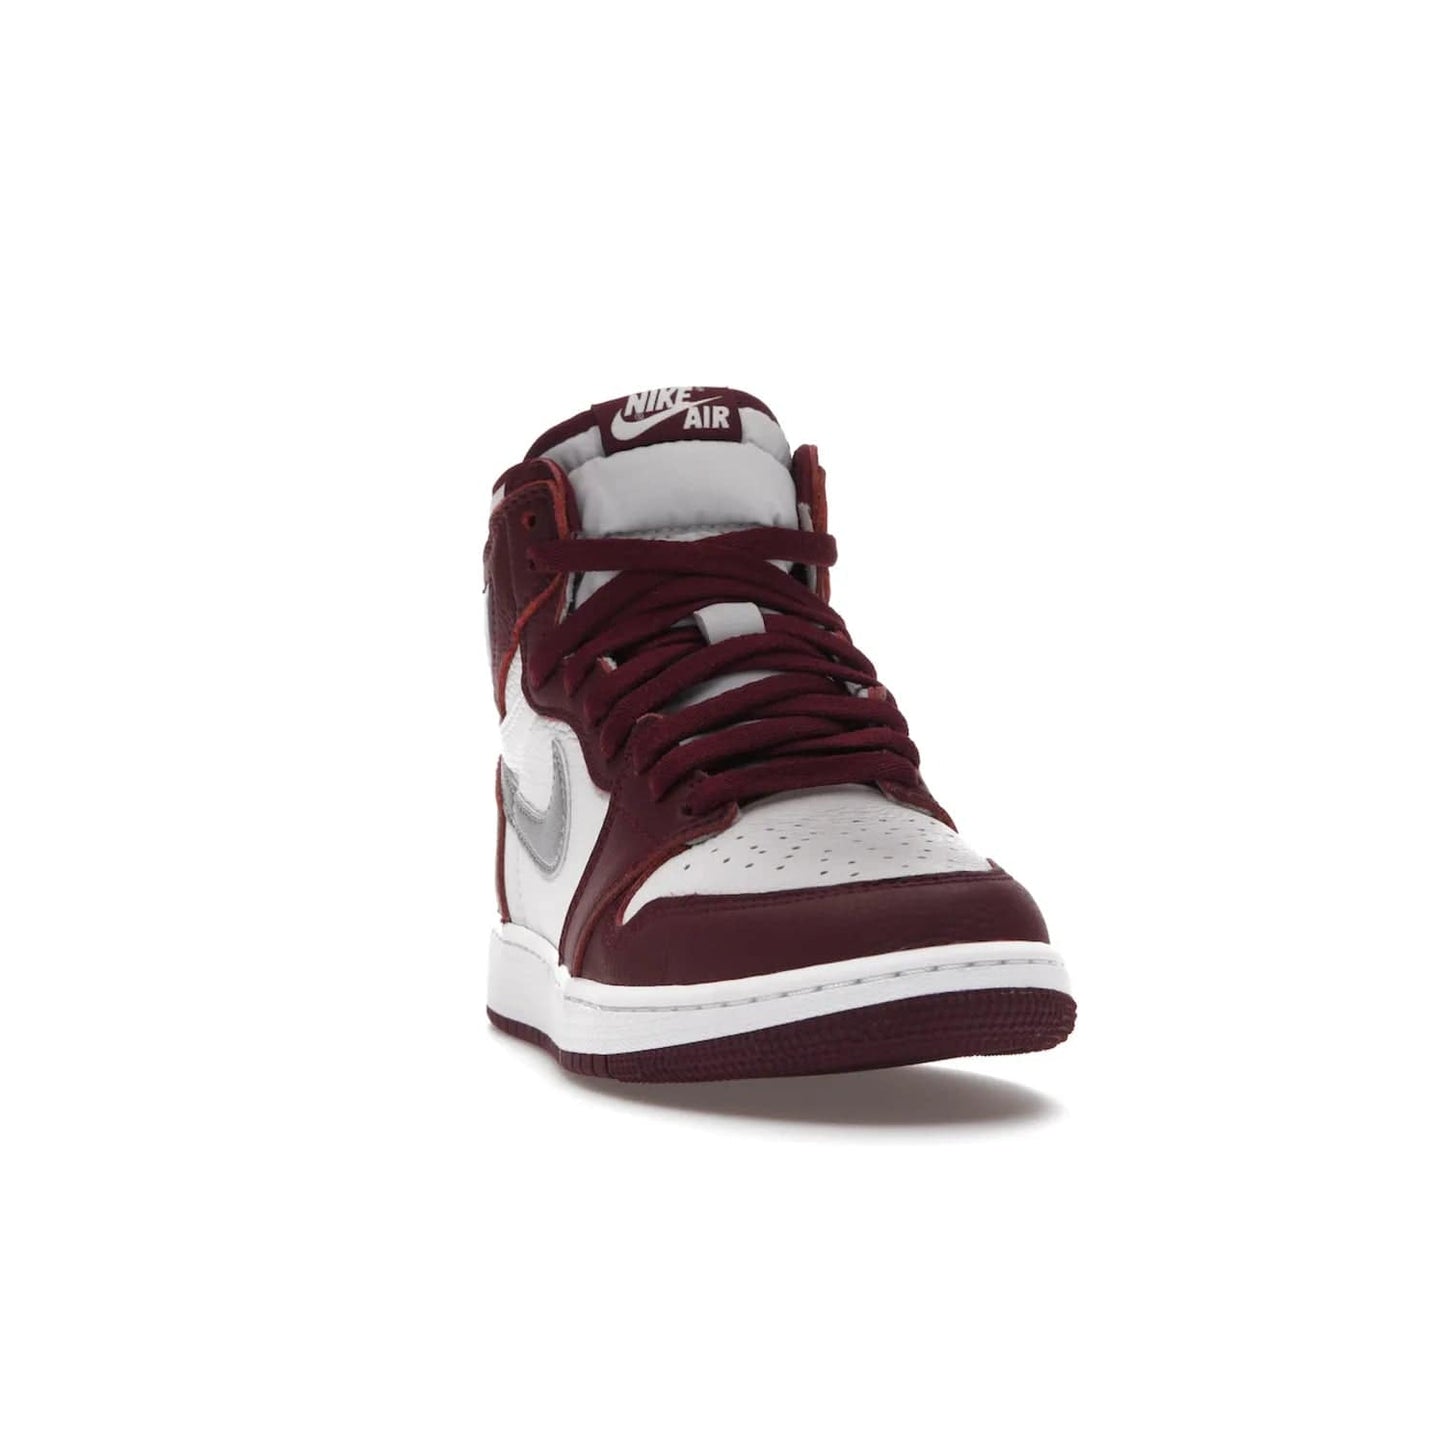 Jordan 1 Retro High OG Bordeaux (GS) - Image 8 - Only at www.BallersClubKickz.com - #
Introducing the Air Jordan 1 Retro High OG Bordeaux GS – a signature colorway part of the Jordan Brand Fall 2021 lineup. White leather upper & Bordeaux overlays, metallic silver swoosh, jeweled Air Jordan Wings logo & more. Step up your style game with this sleek fall season silhouette.